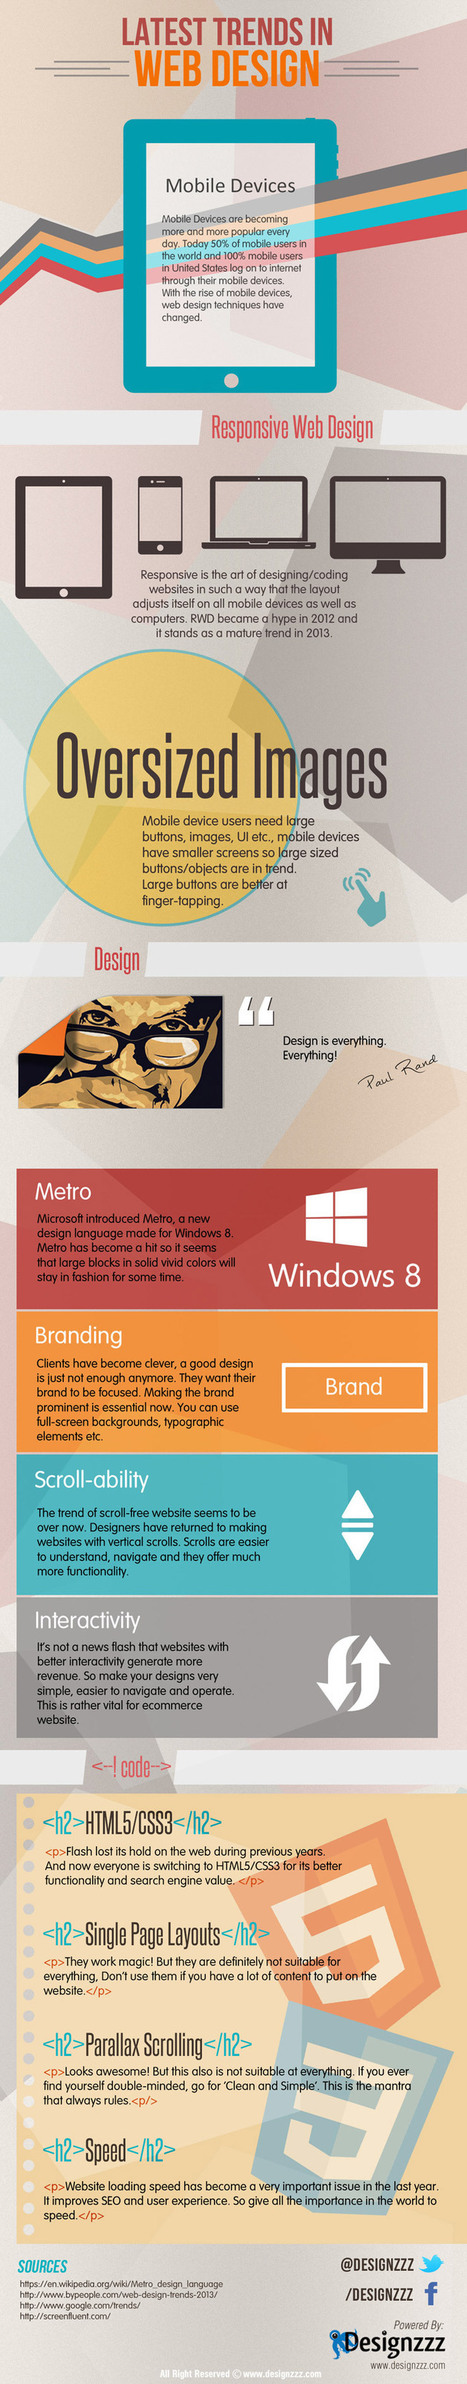 Latest Trends in Web Design [Infographic] | Information Technology & Social Media News | Scoop.it